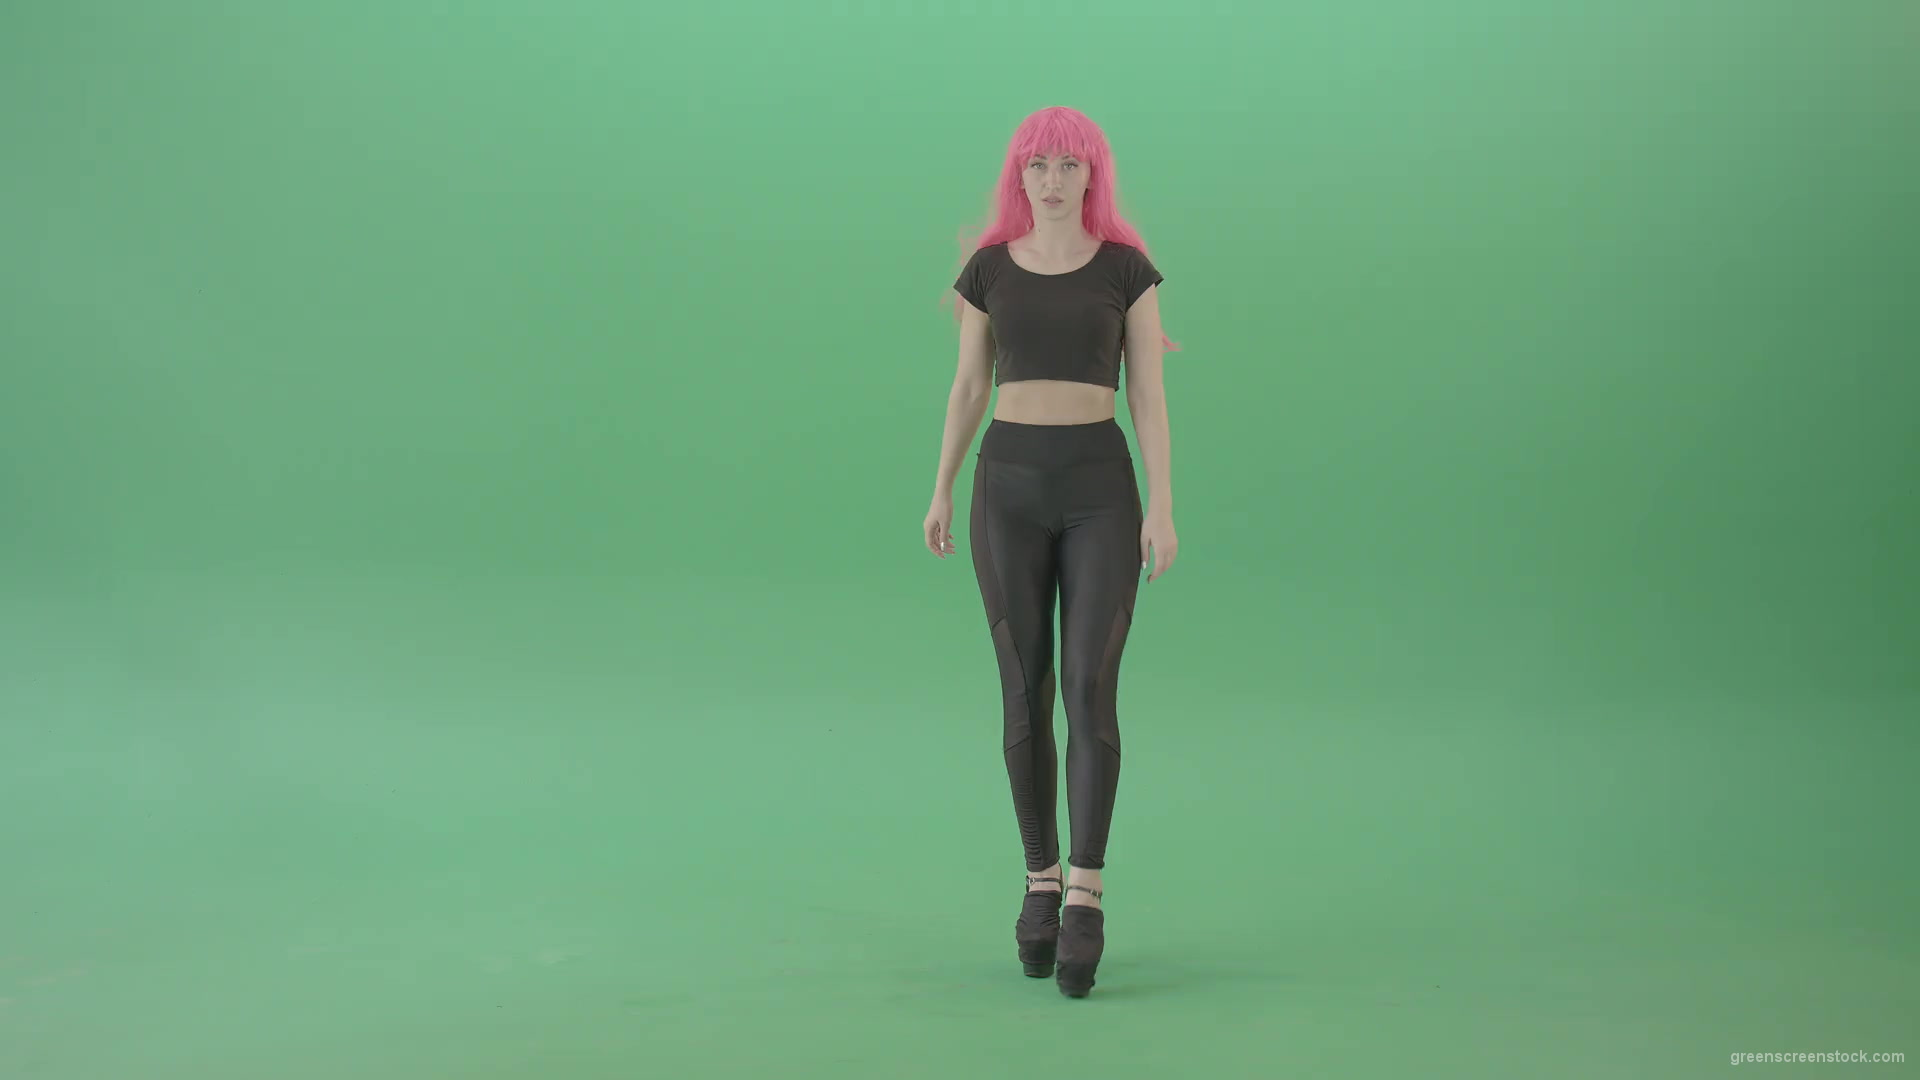 Pink-hair-EMO-sexy-girl-on-green-screen-posing-and-dancing-4K-Video-Footage-1920_001 Green Screen Stock